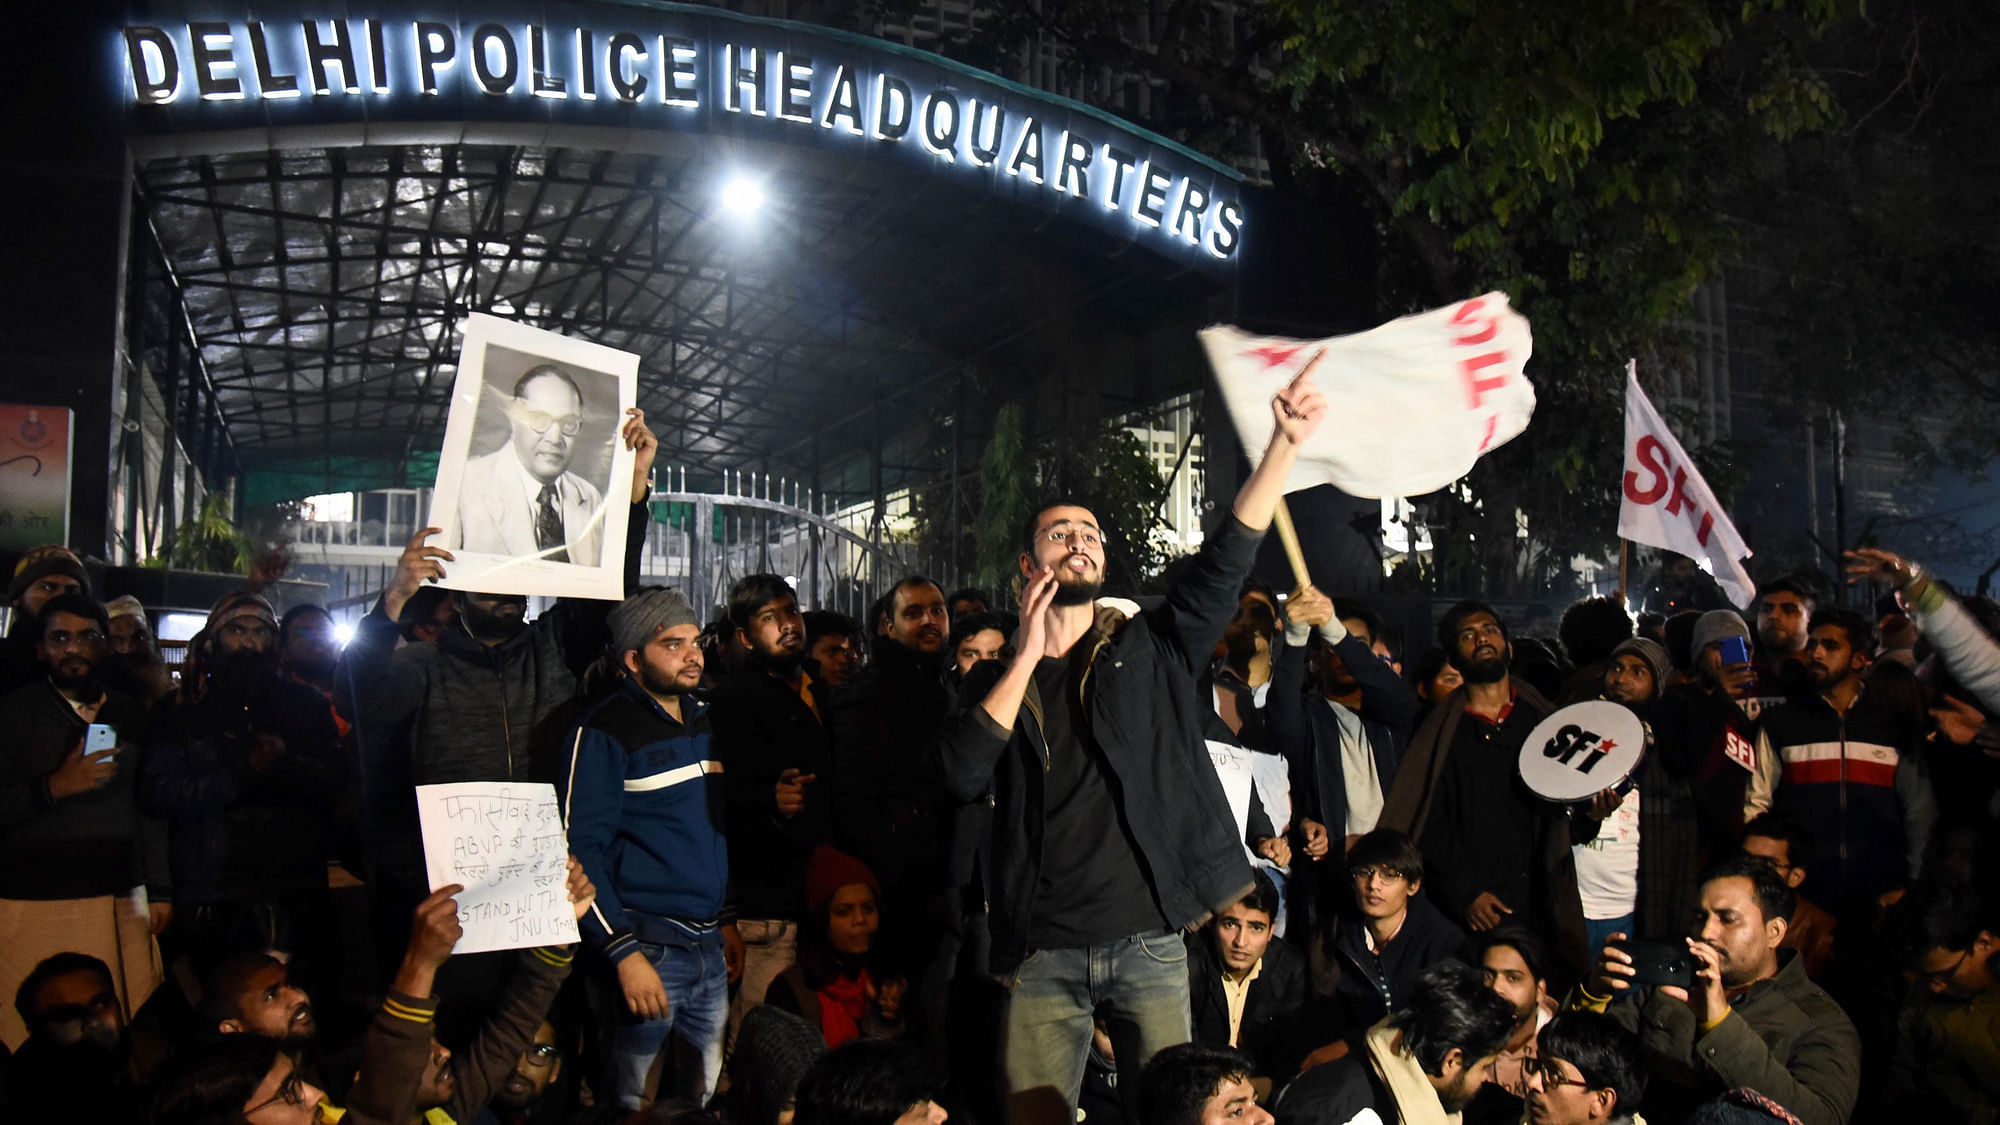 Protests at the Delhi police headquarters after the violence in JNU on 5 January.